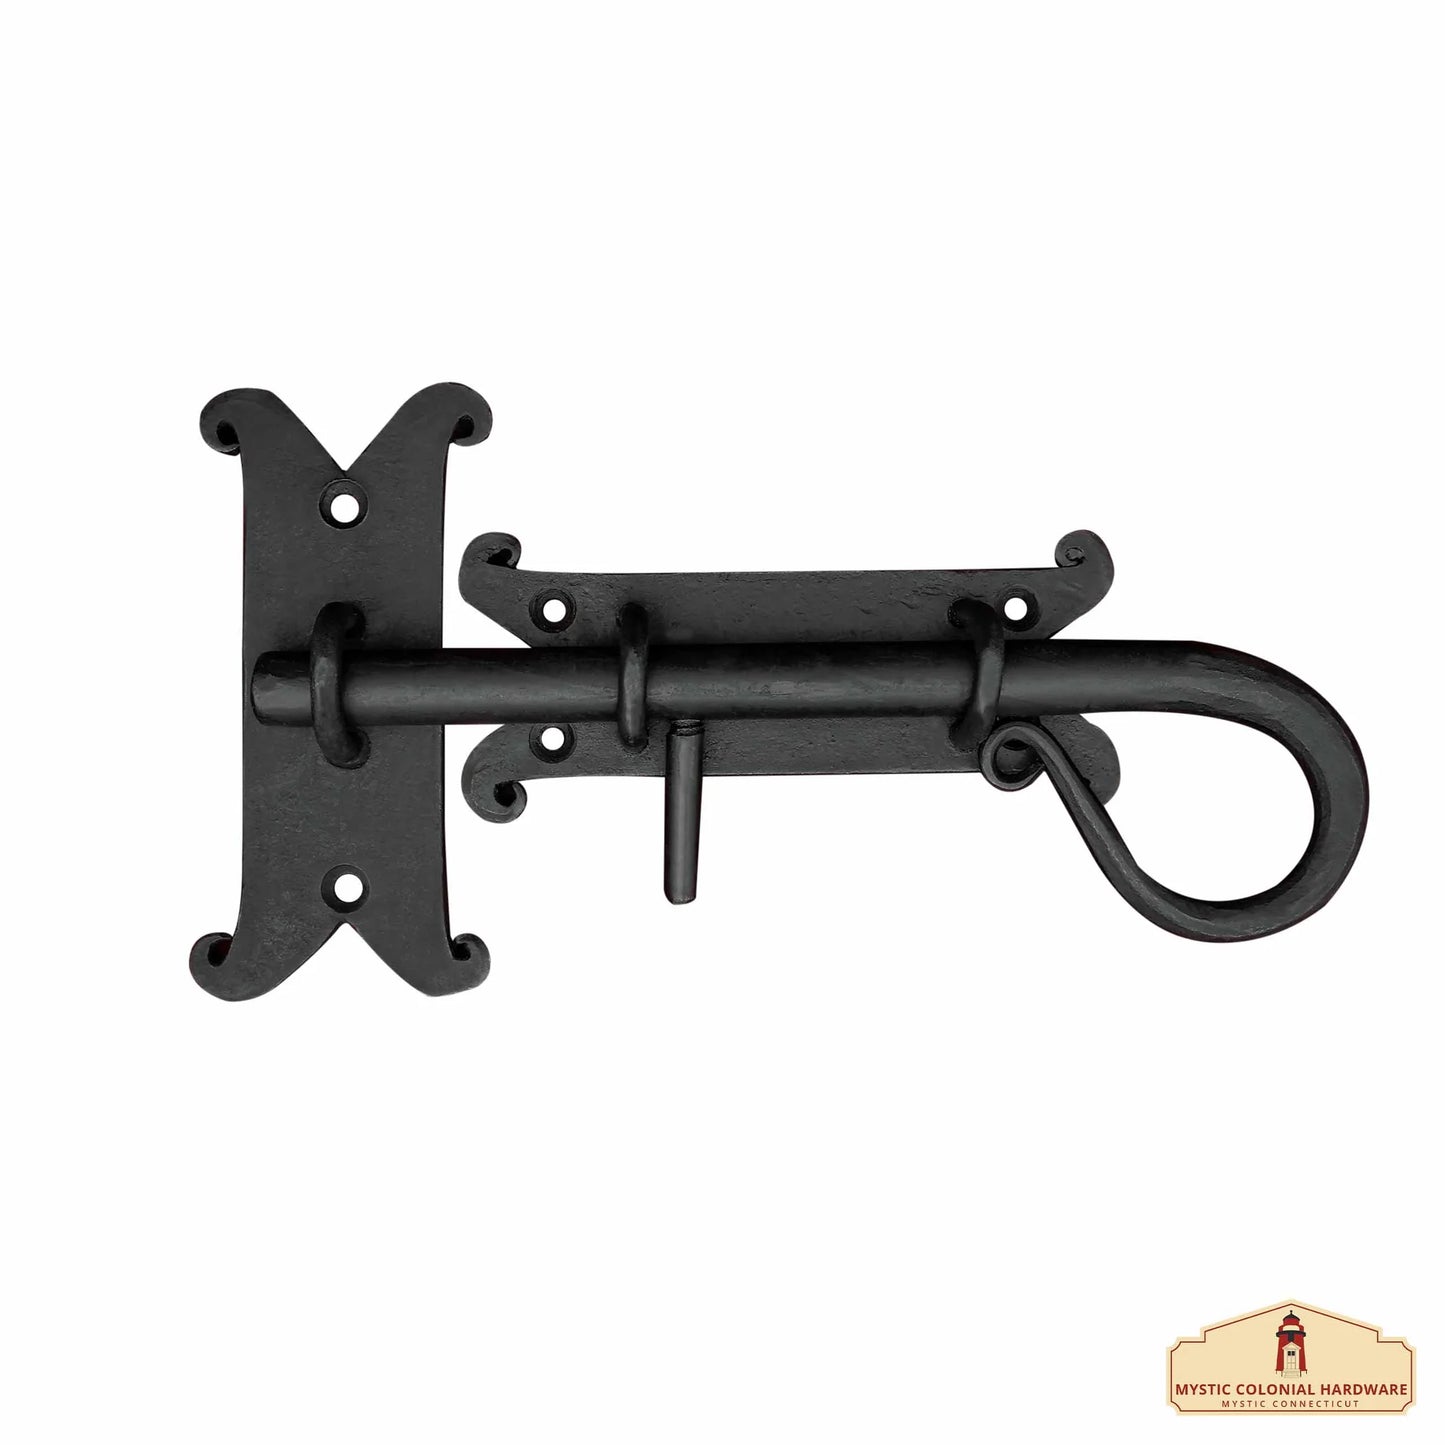 Rustic Hand Forged Door Bolt Lock with Sliding Pin - 8 inch